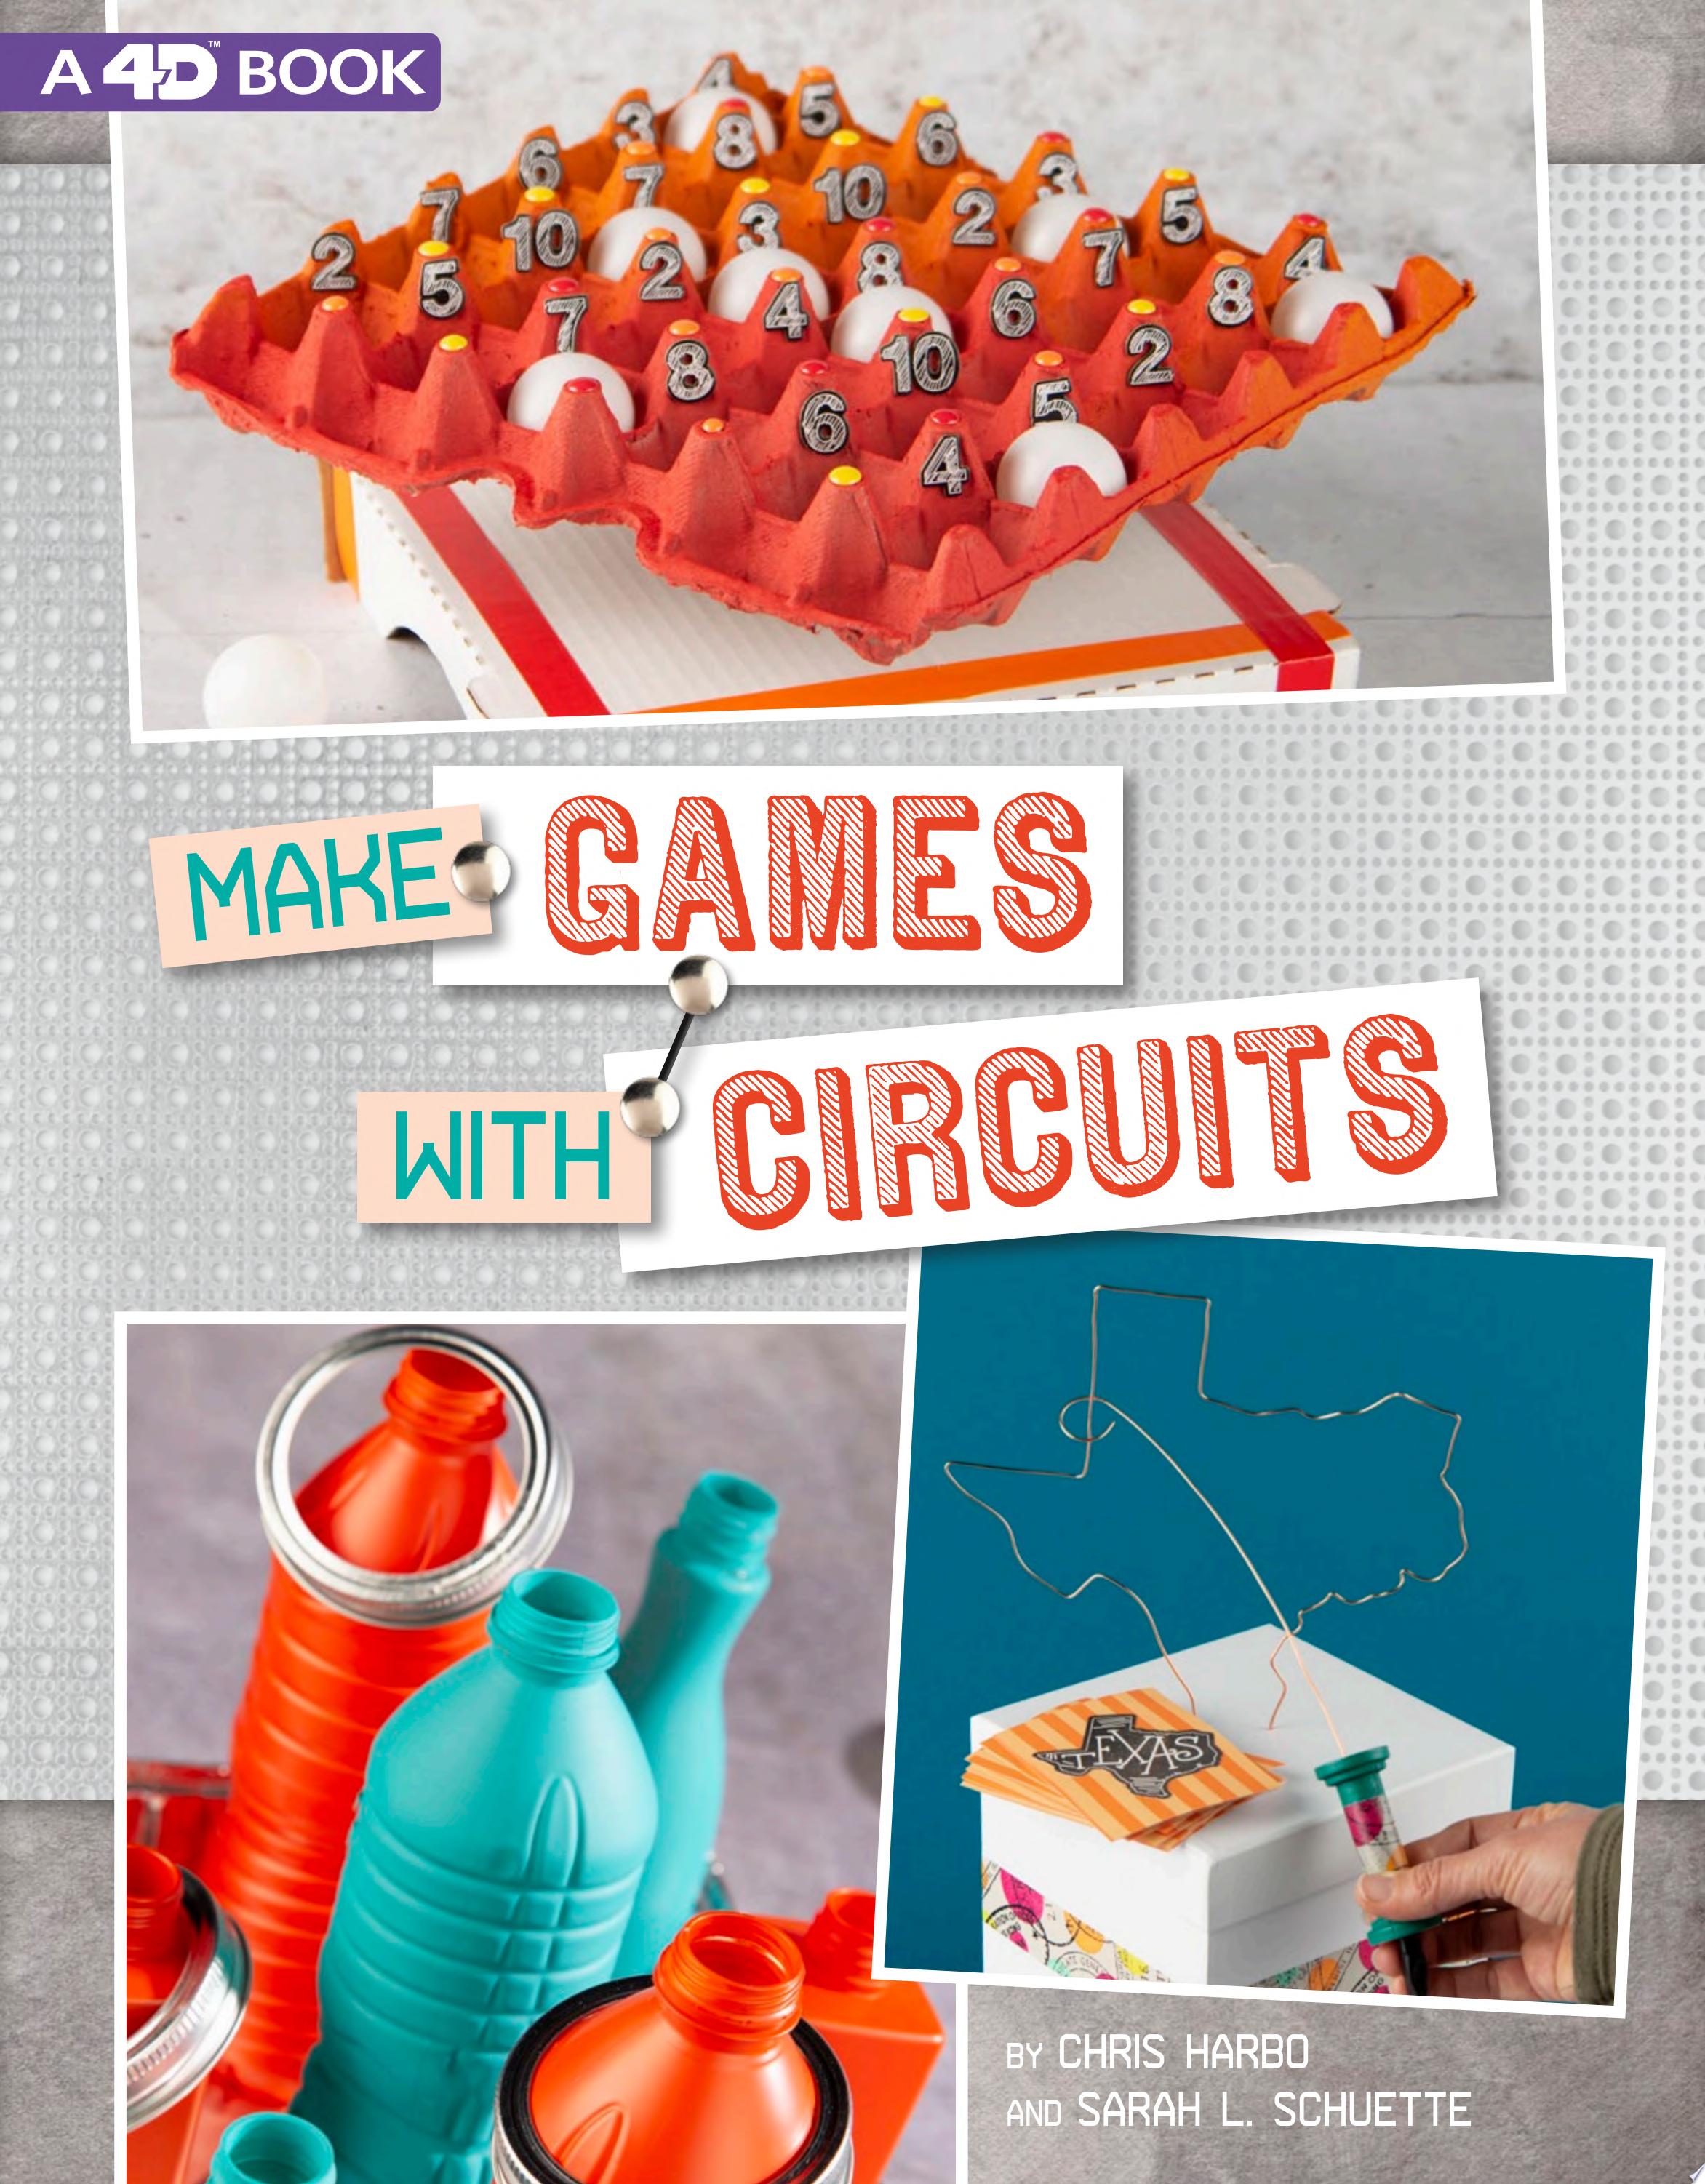 Image for "Make Games with Circuits"